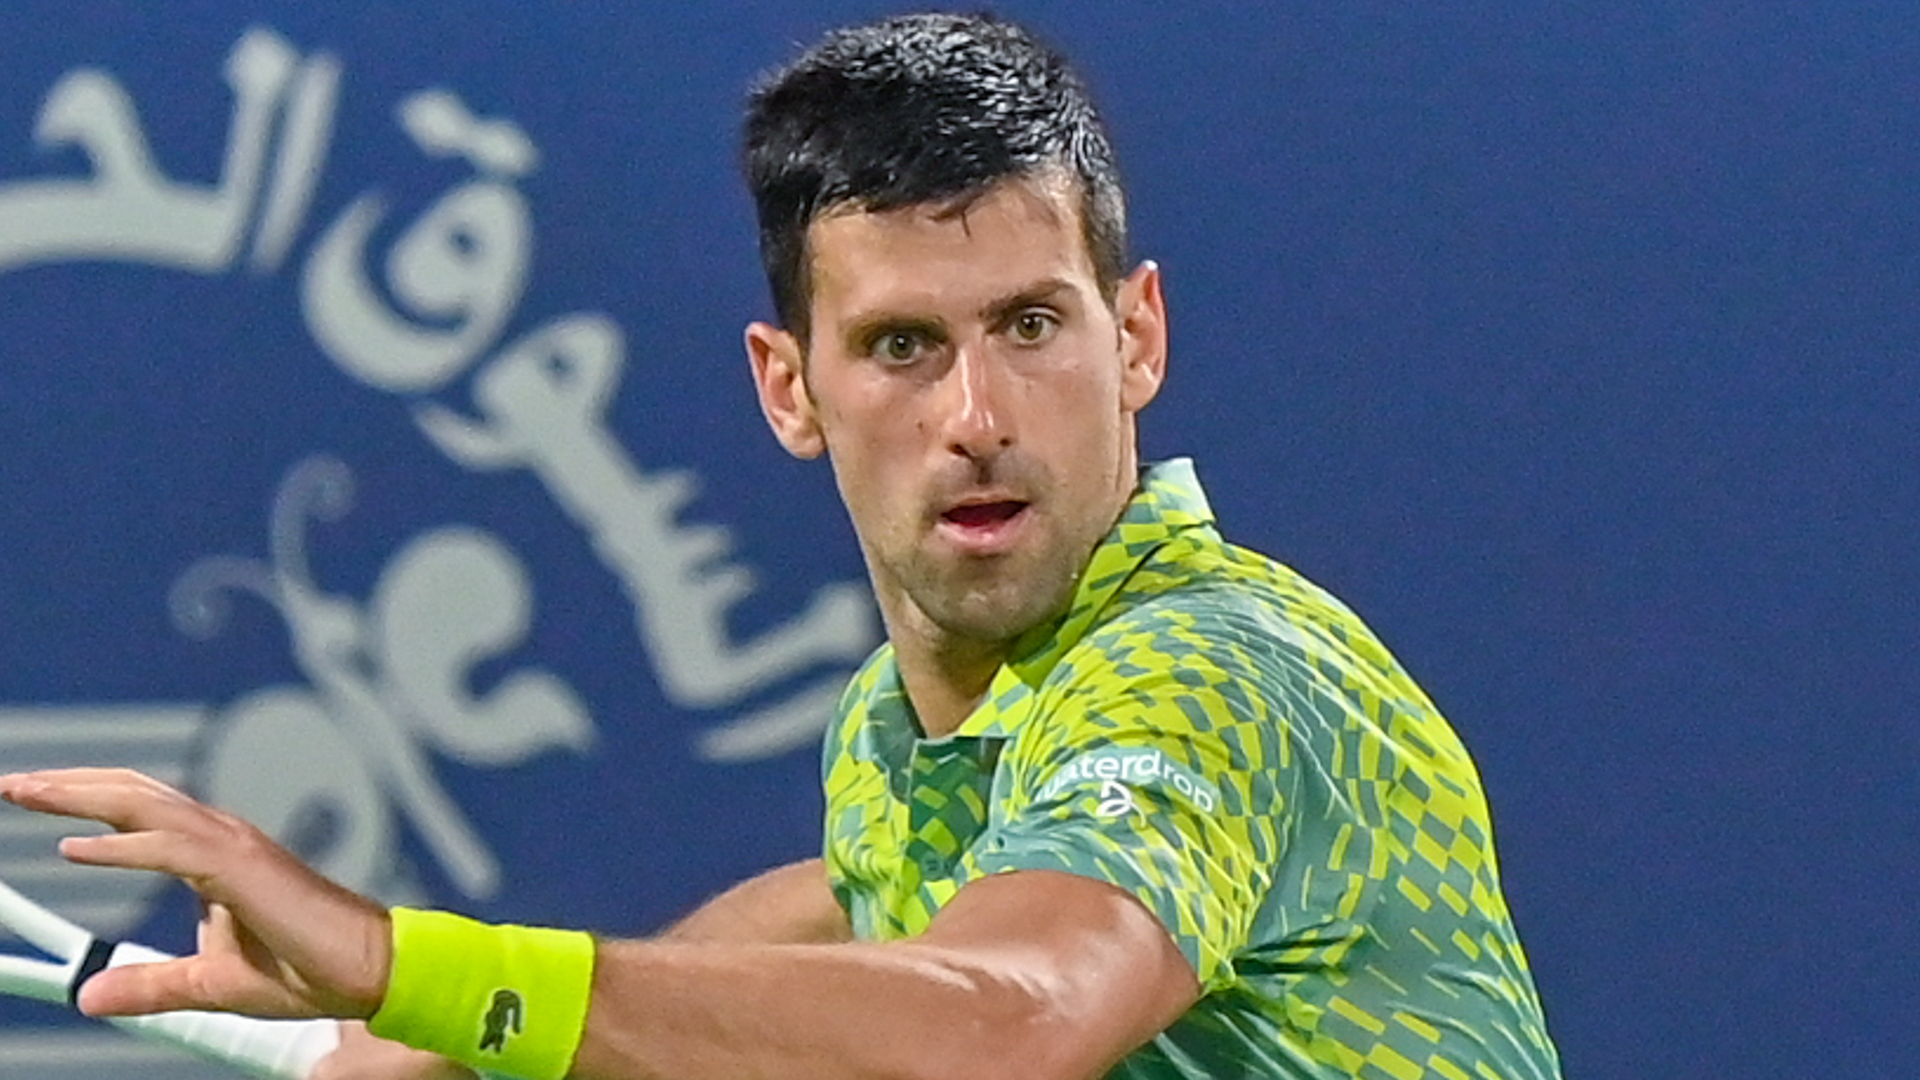 Djokovic not given up on playing at Miami Open beIN SPORTS